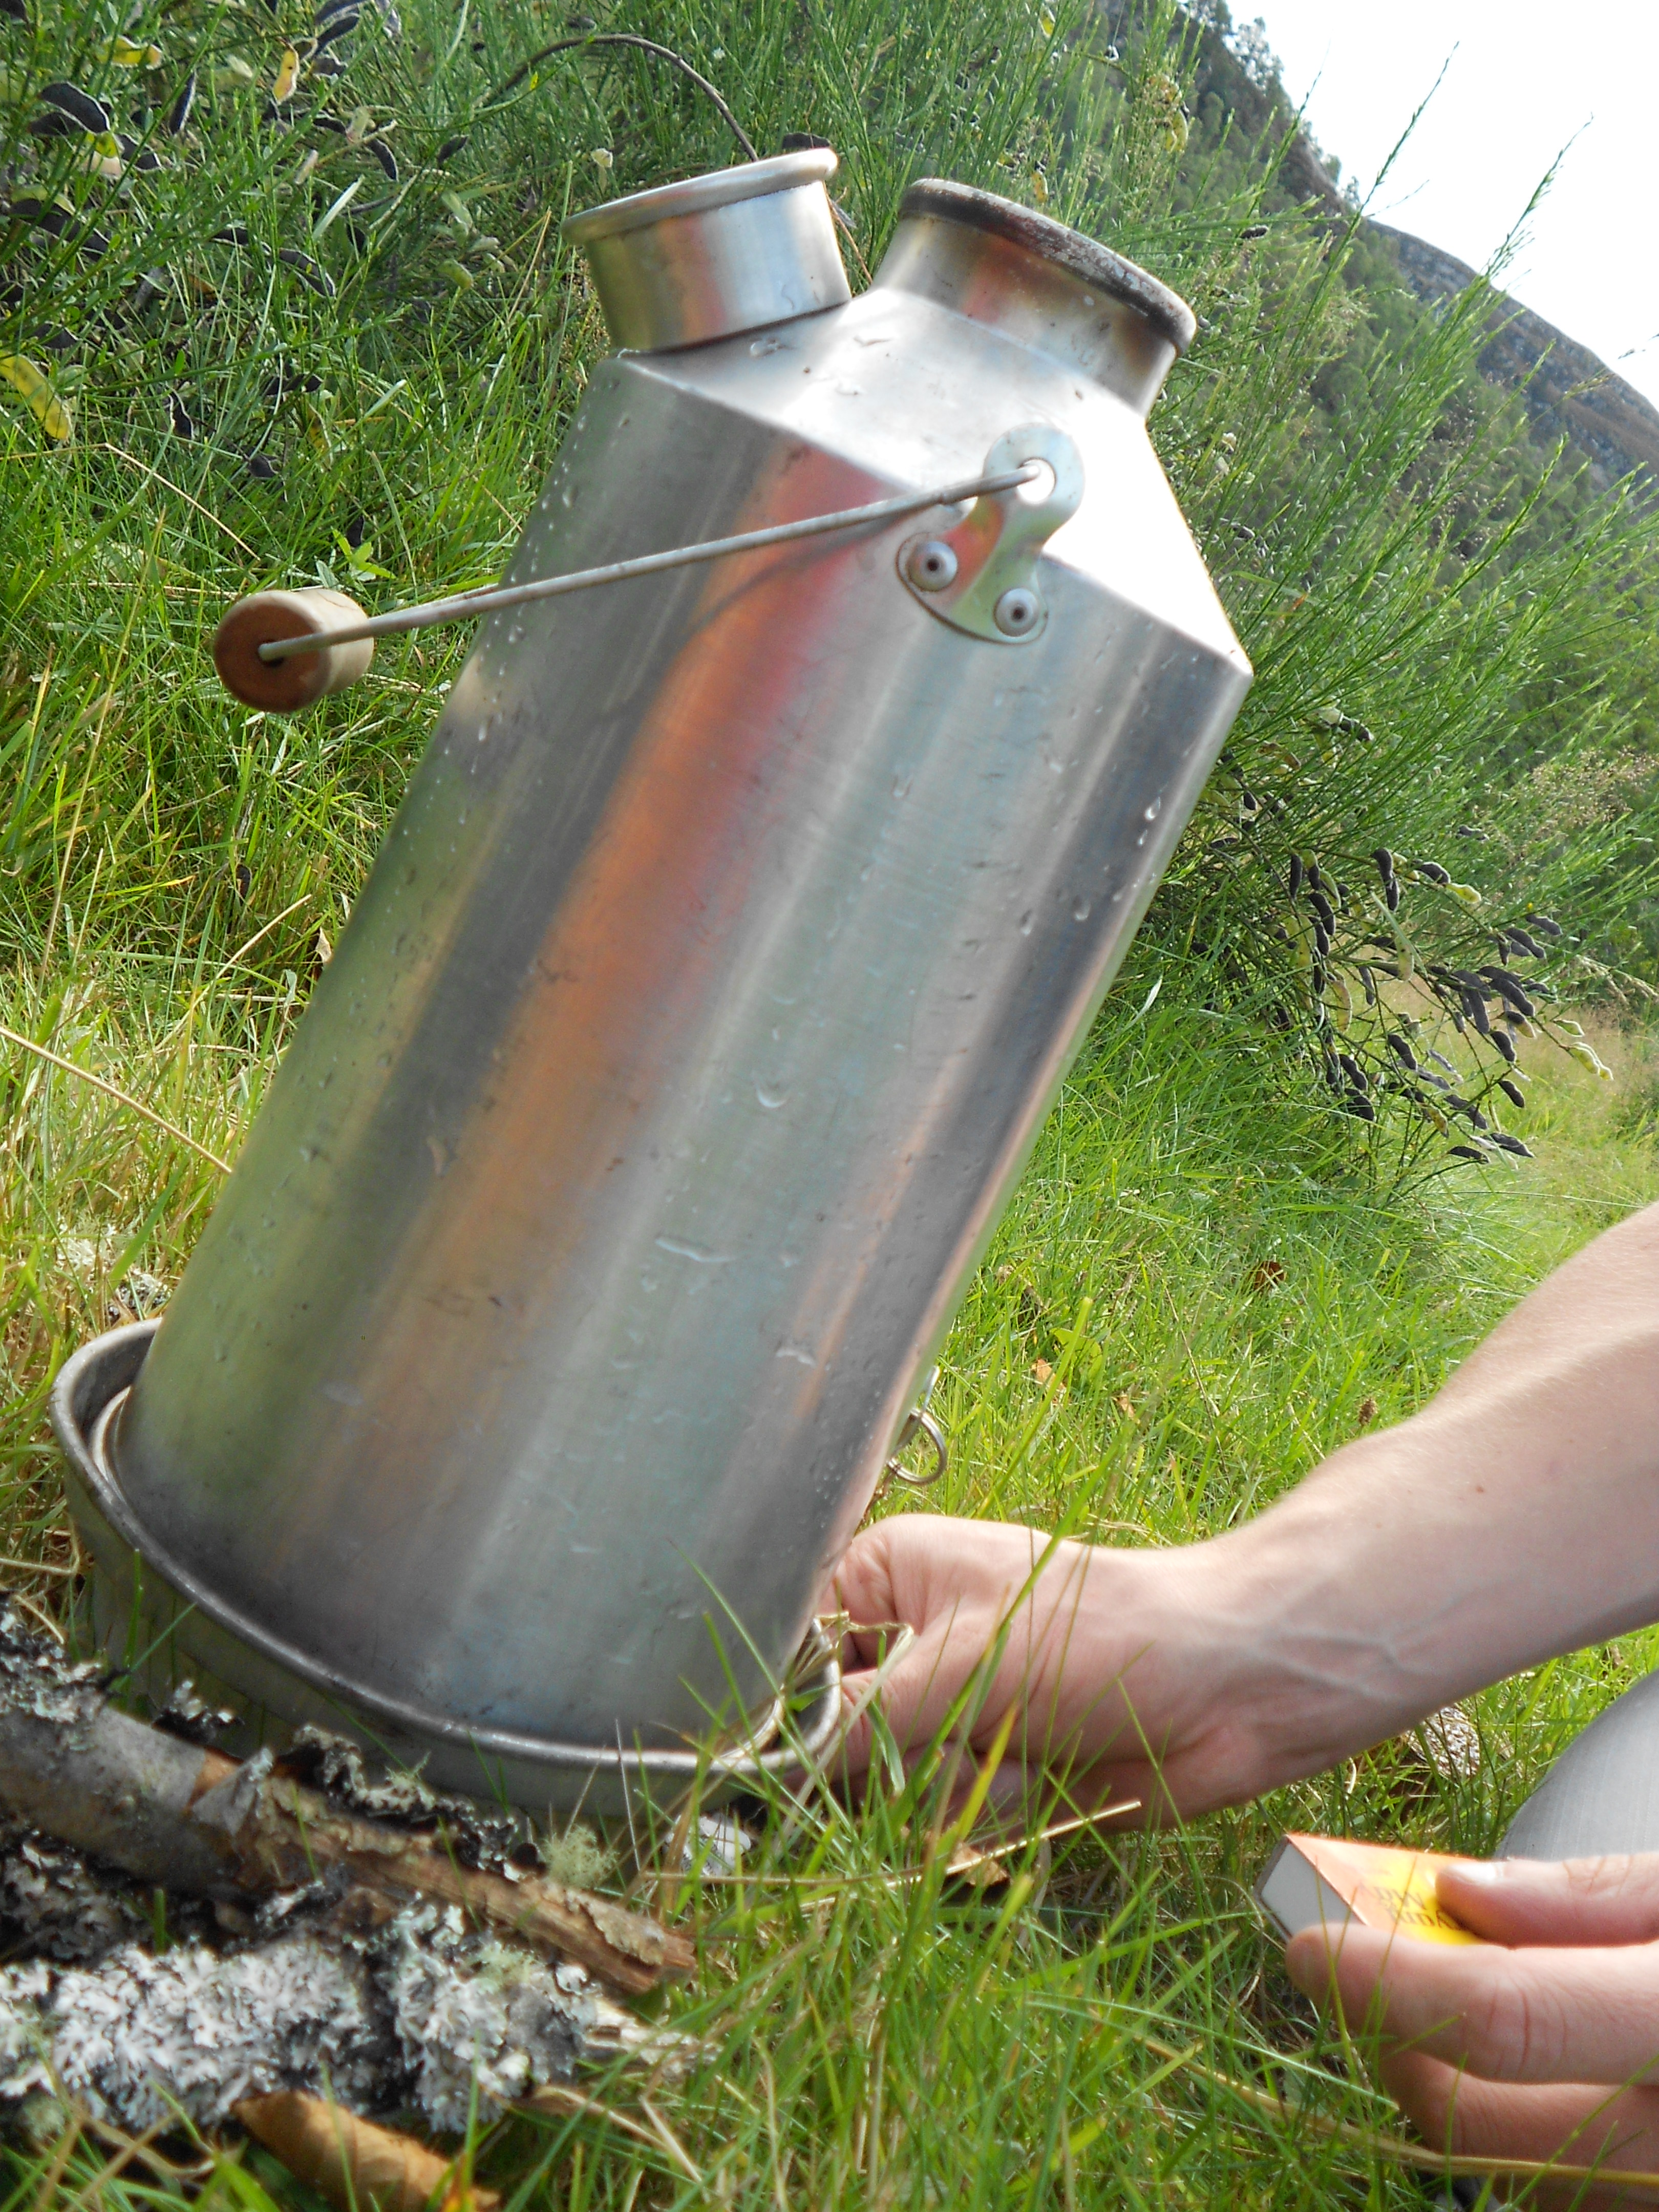 How to use a storm kettle | The Girl Outdoors